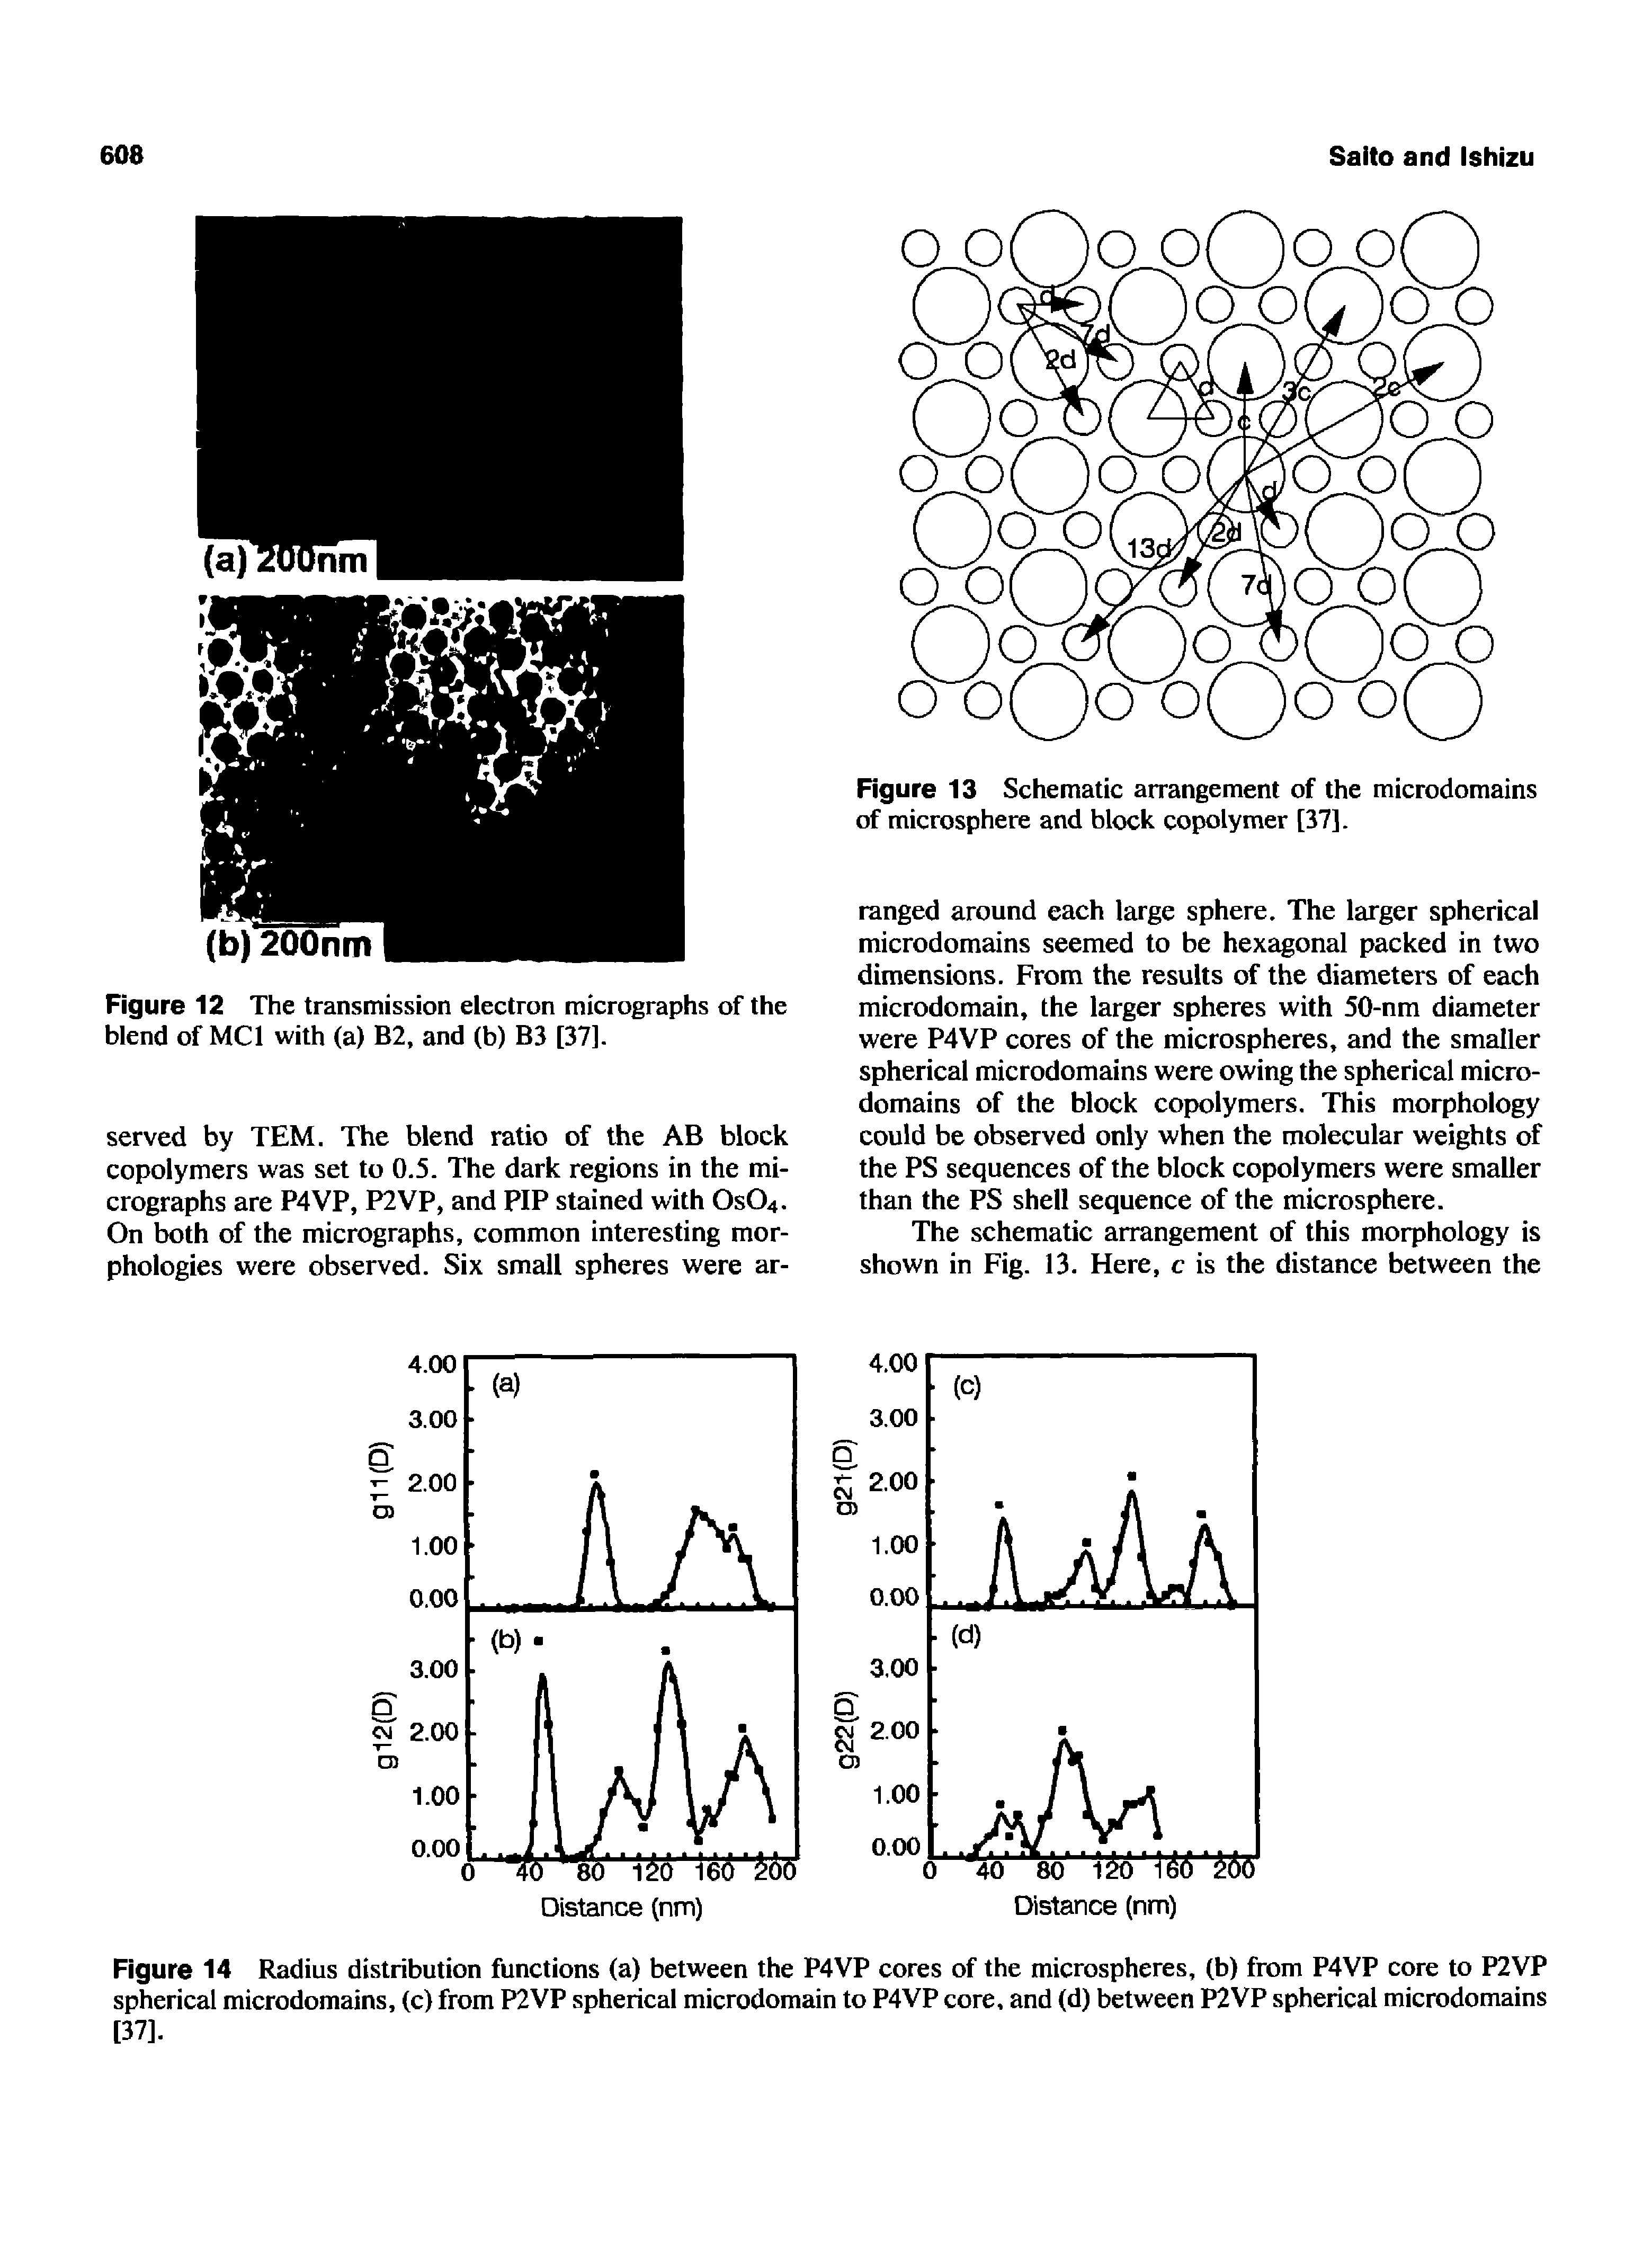 Figure 12 The transmission electron micrographs of the blend of MCI with (a) B2, and (b) B3 [37].